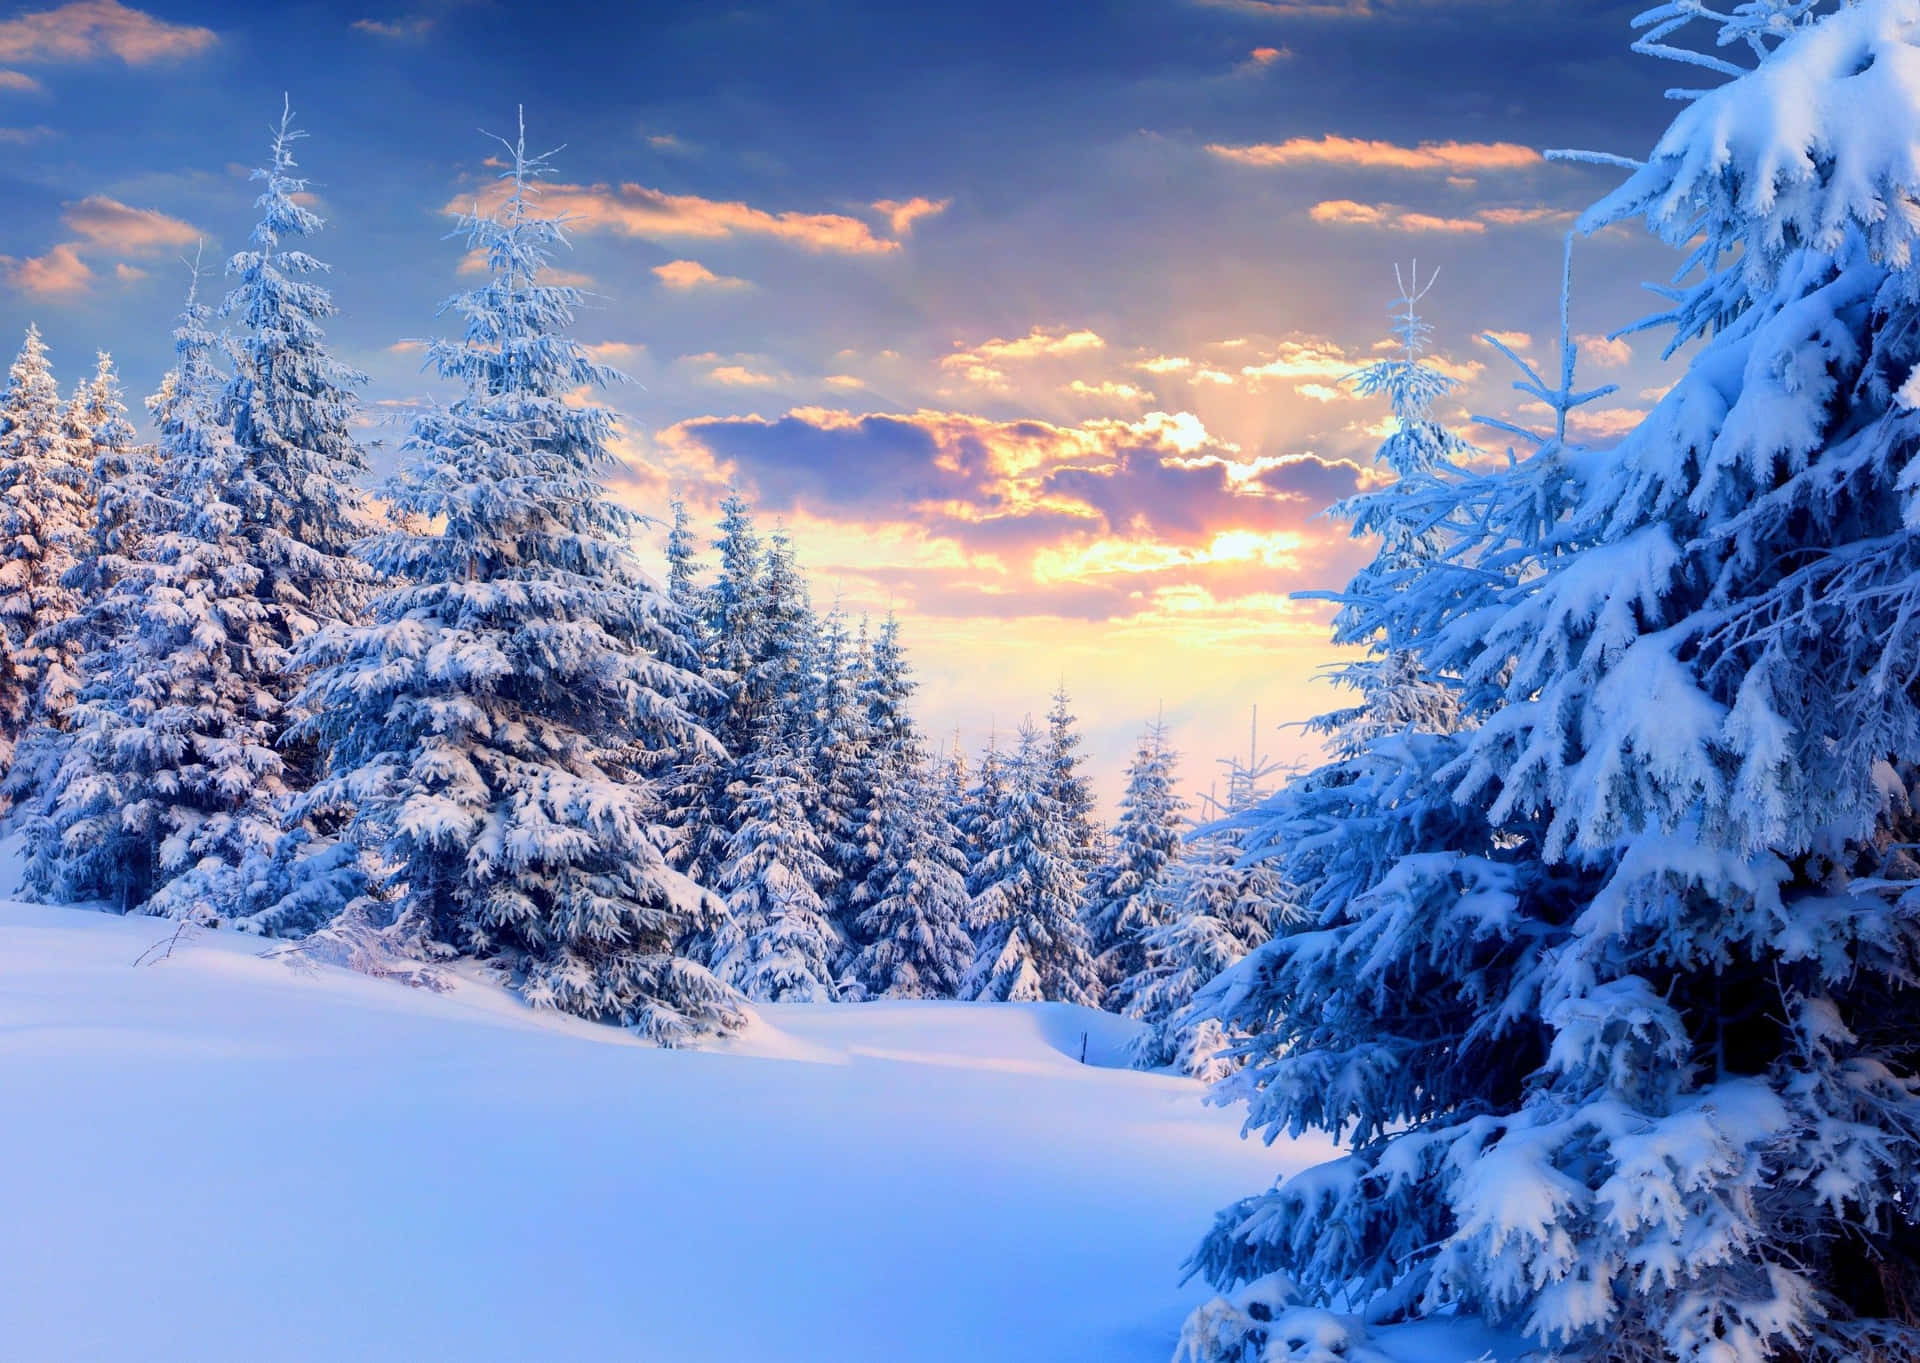 Caption: Snow-covered Trees in Winter Forest Wallpaper